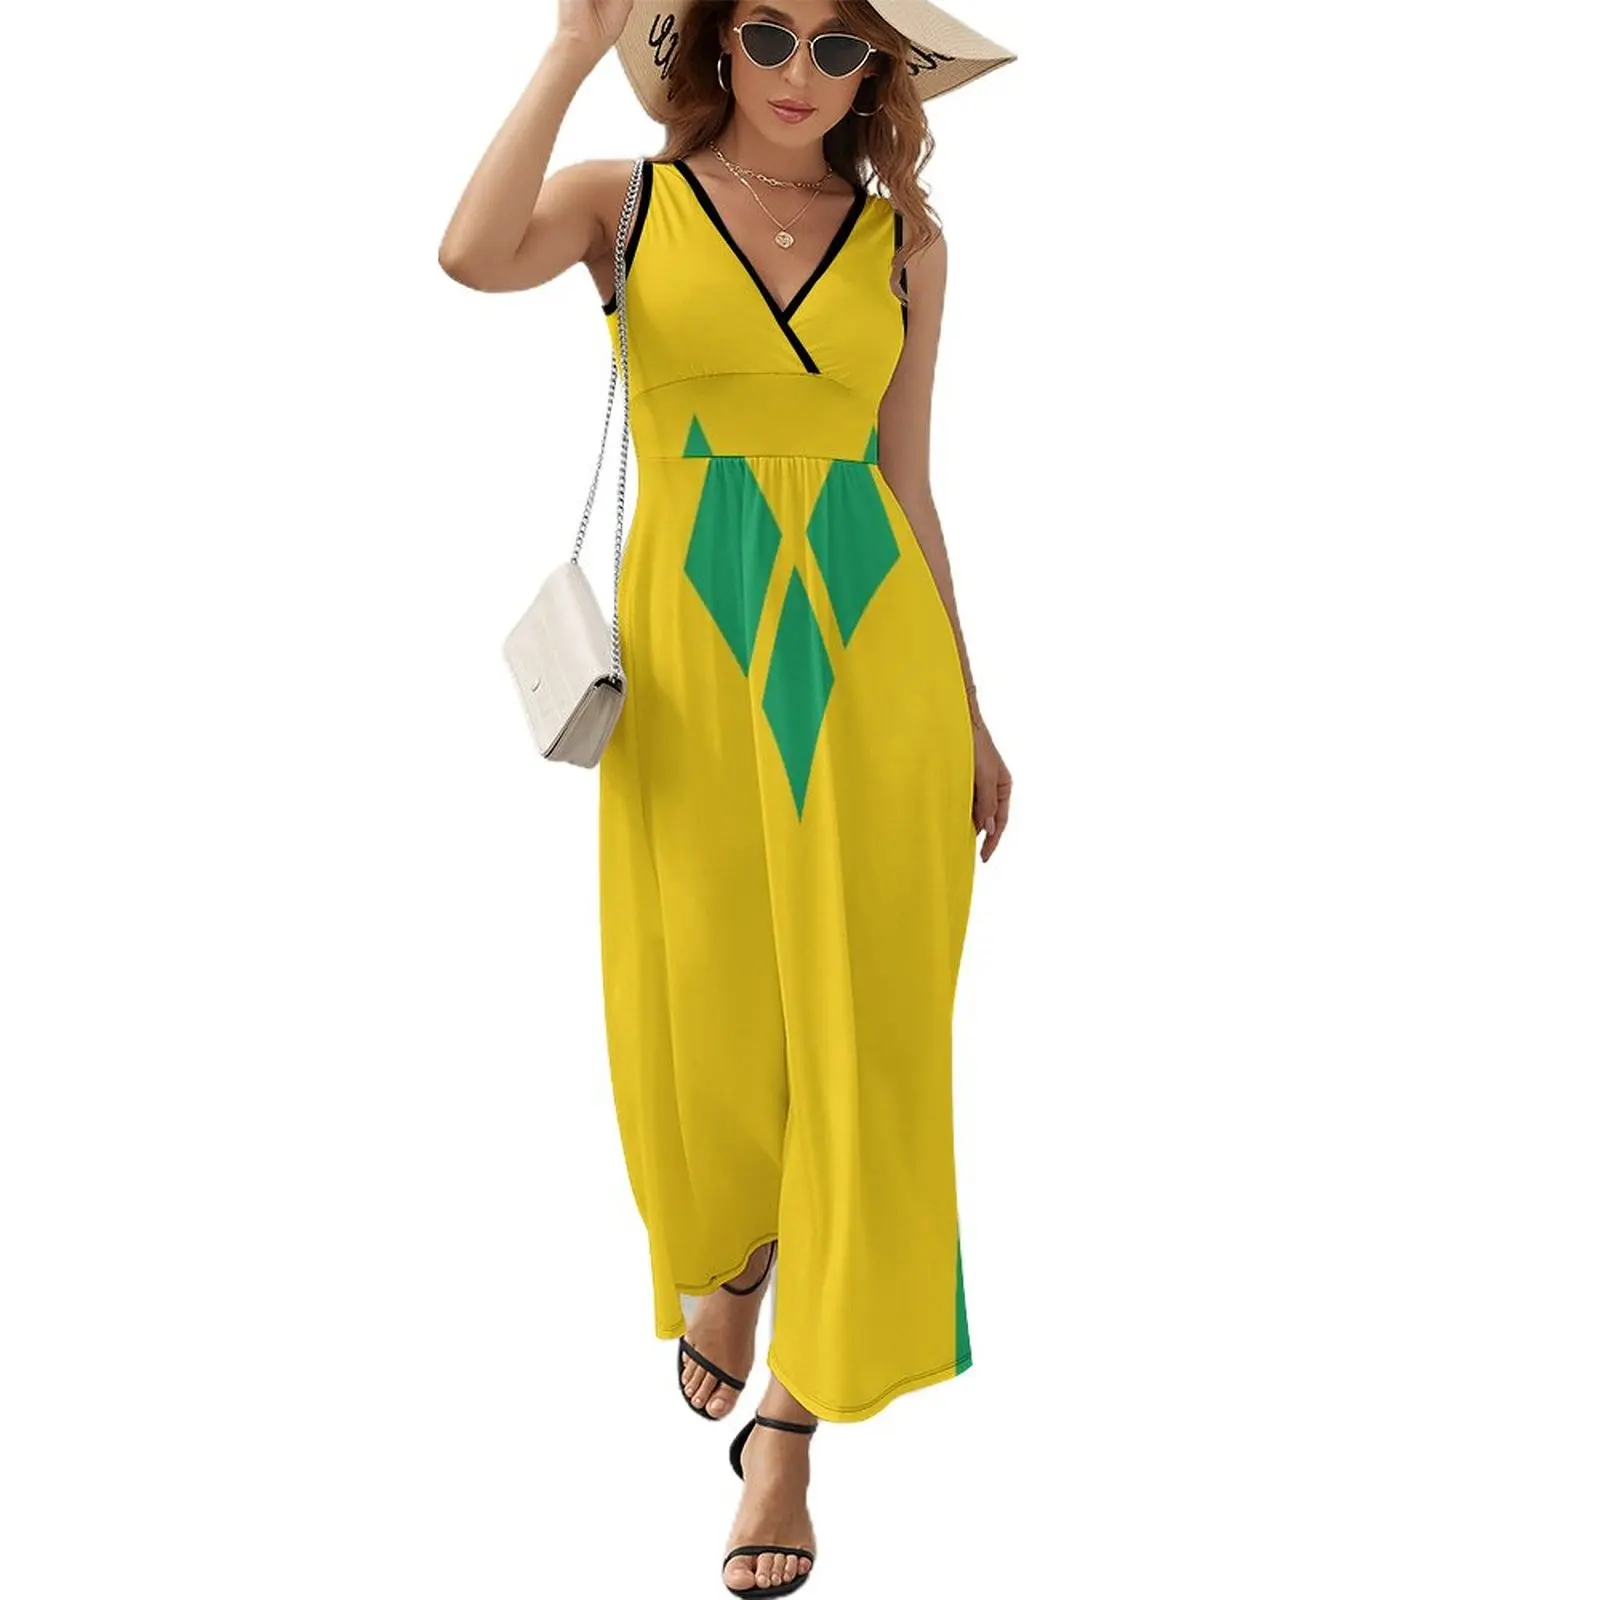 

St. Vincent and The Grenadines National Flag Sleeveless Dress Dress for girls women clothes